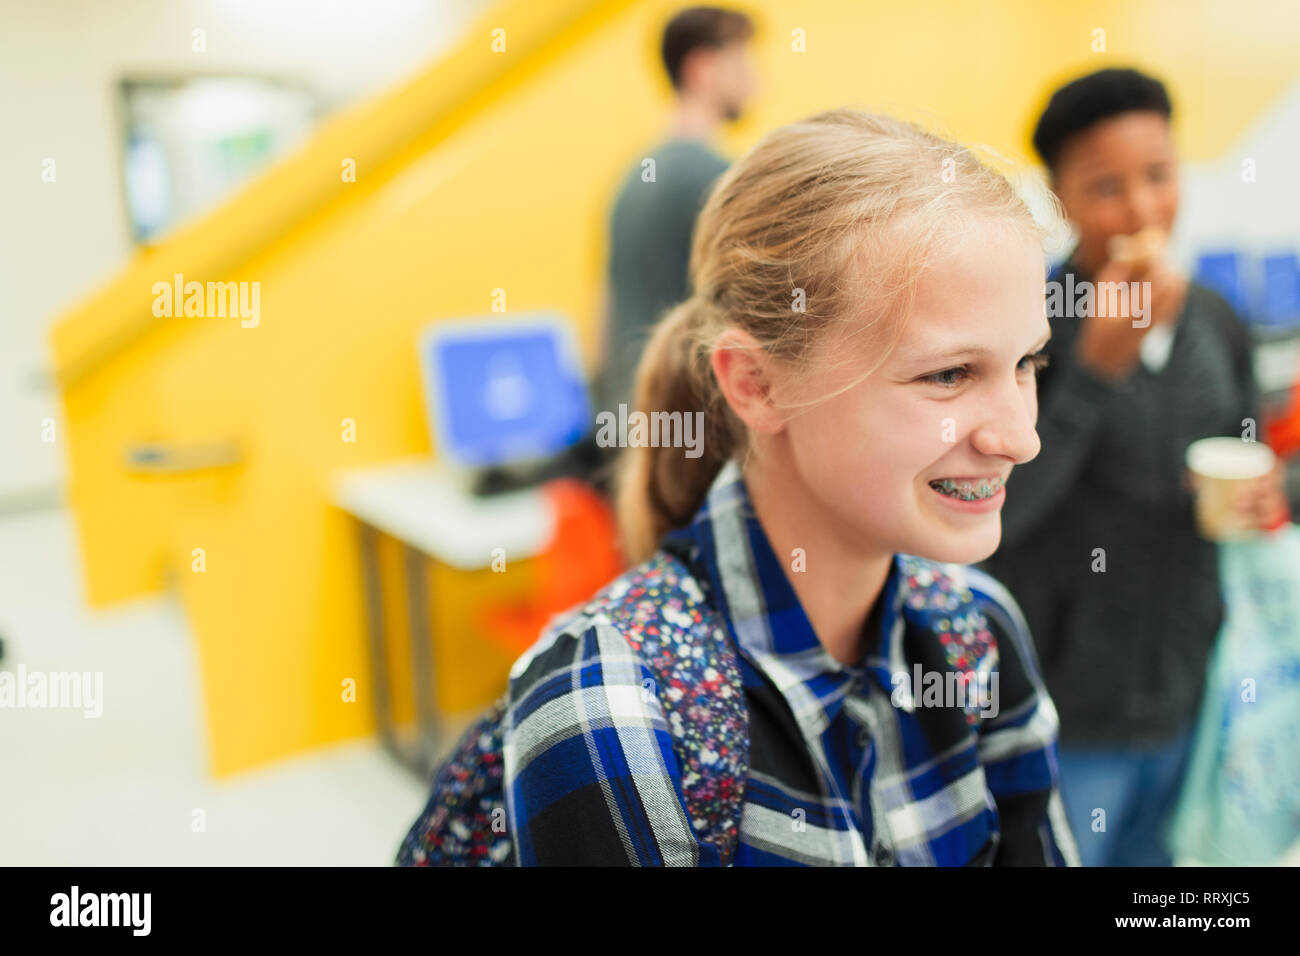 Smiling junior high girl student with braces Stock Photo